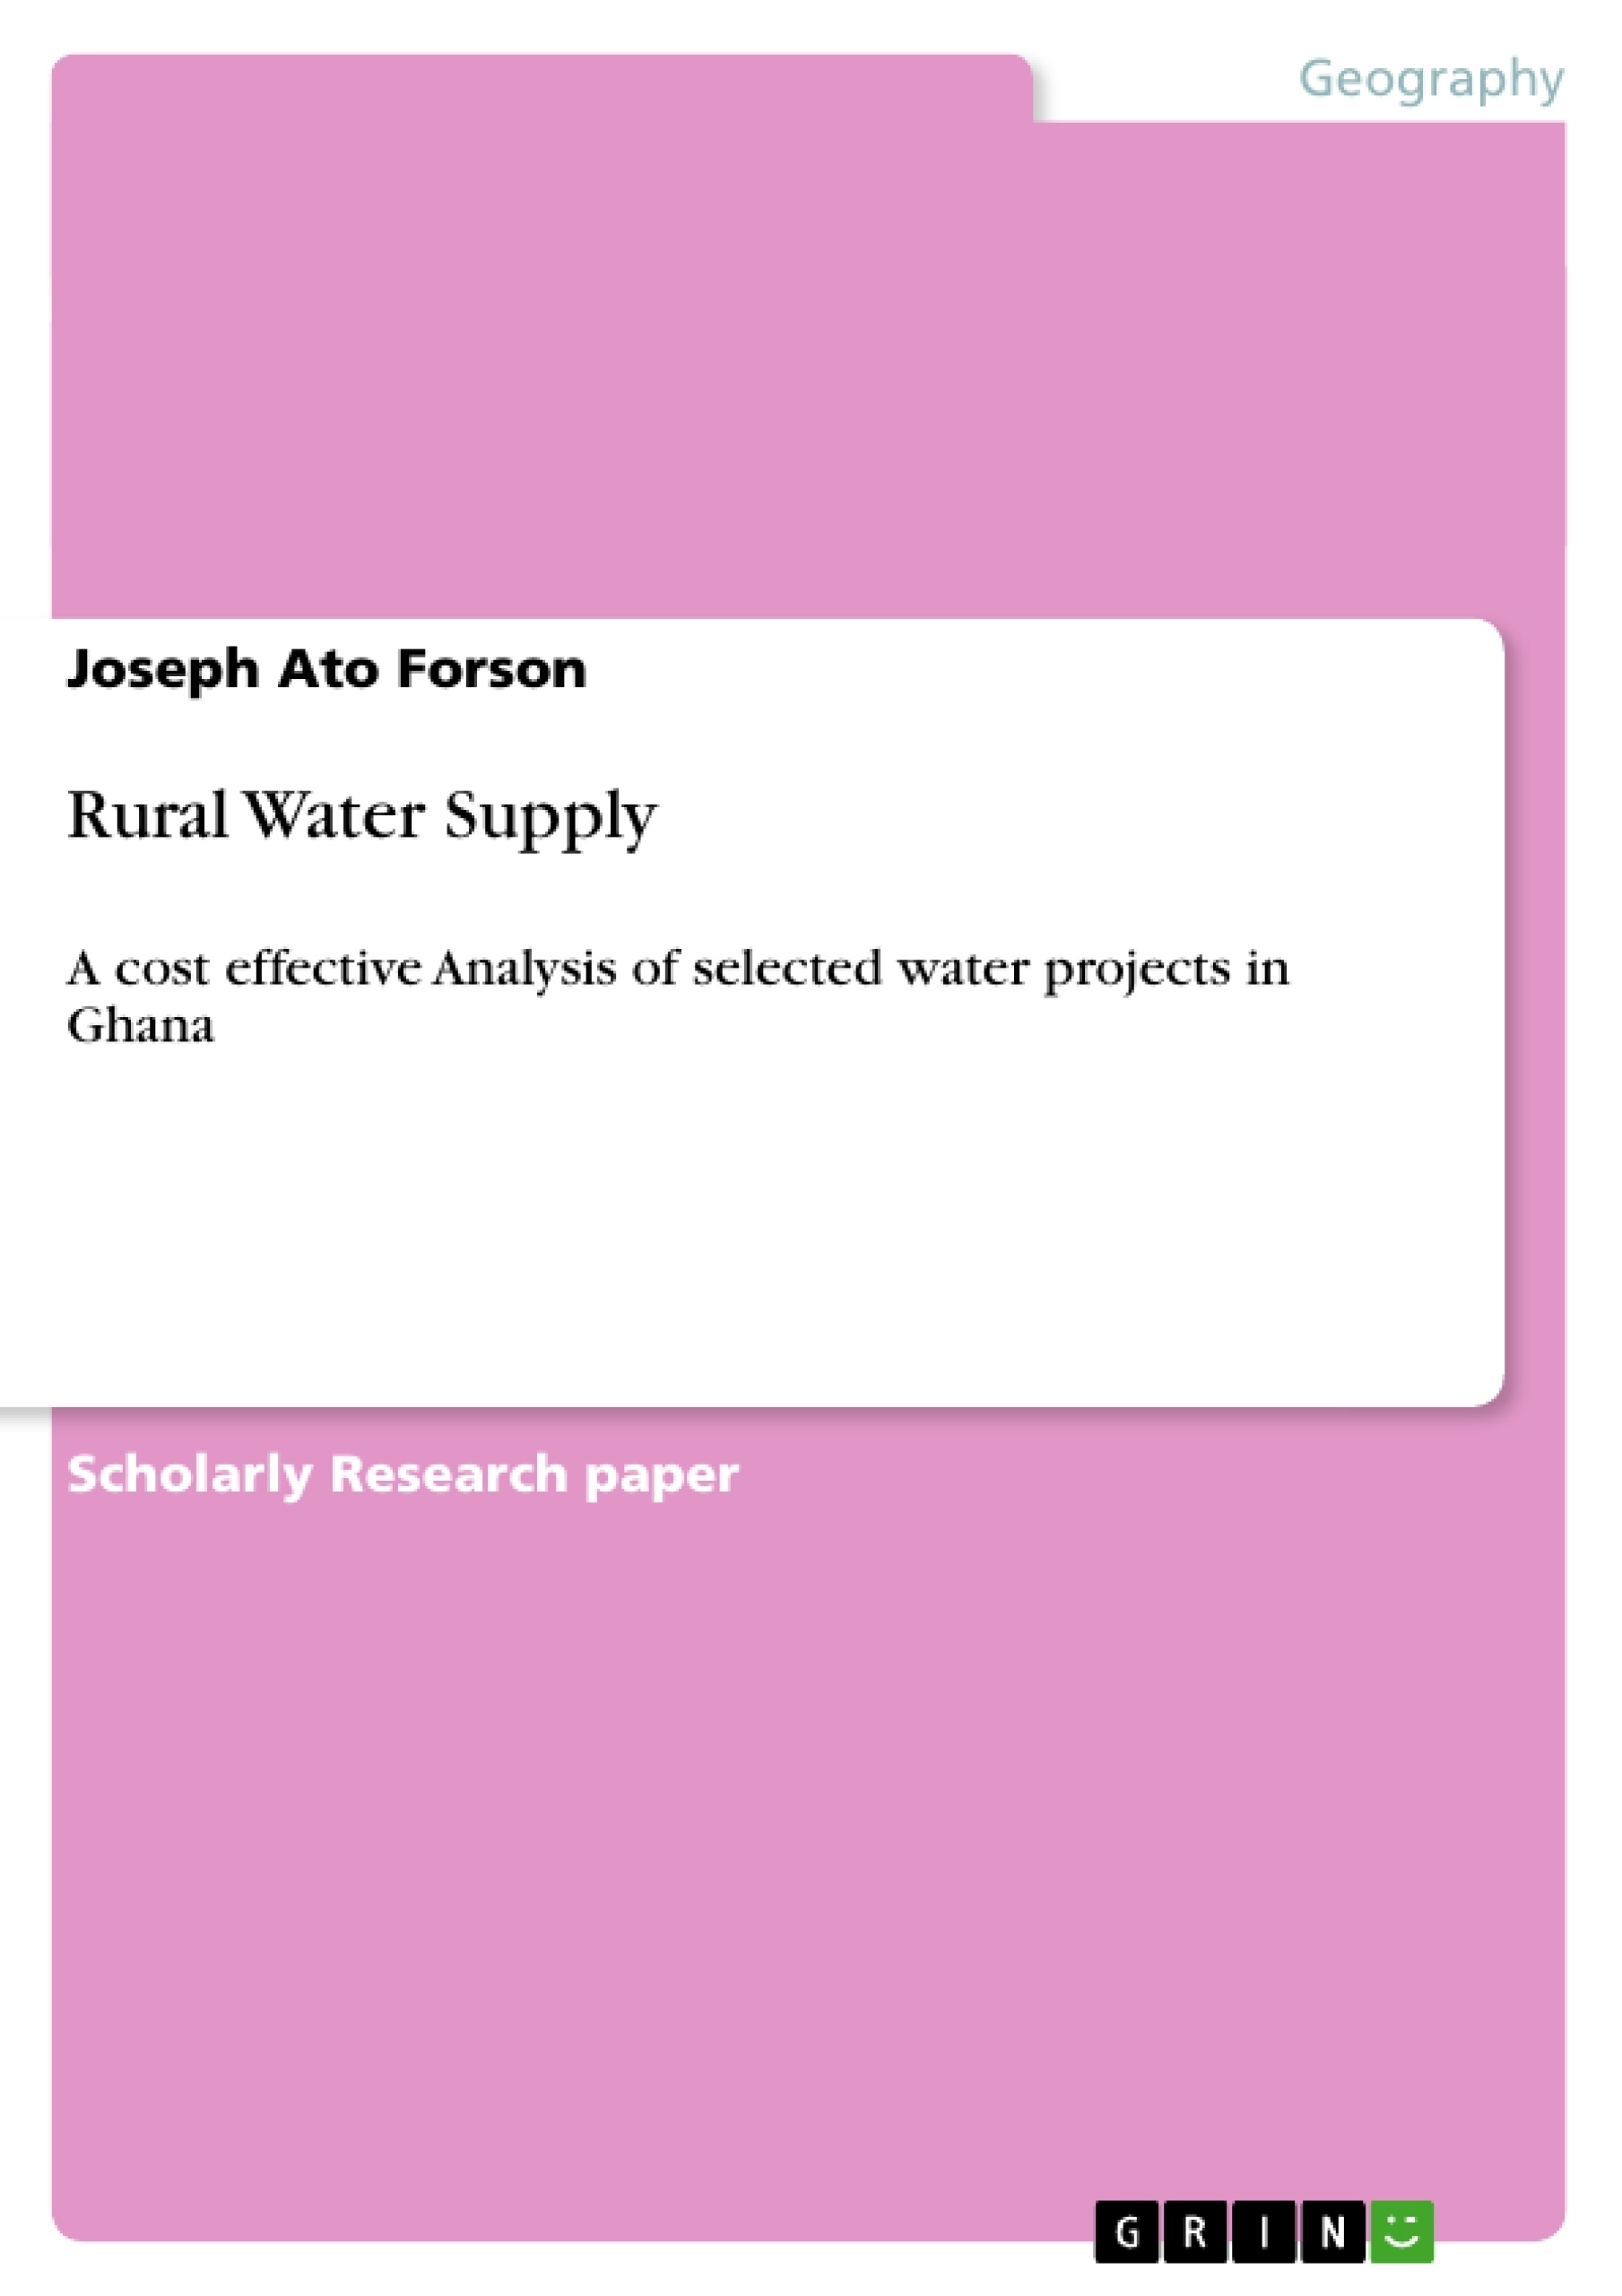 Title: Rural Water Supply